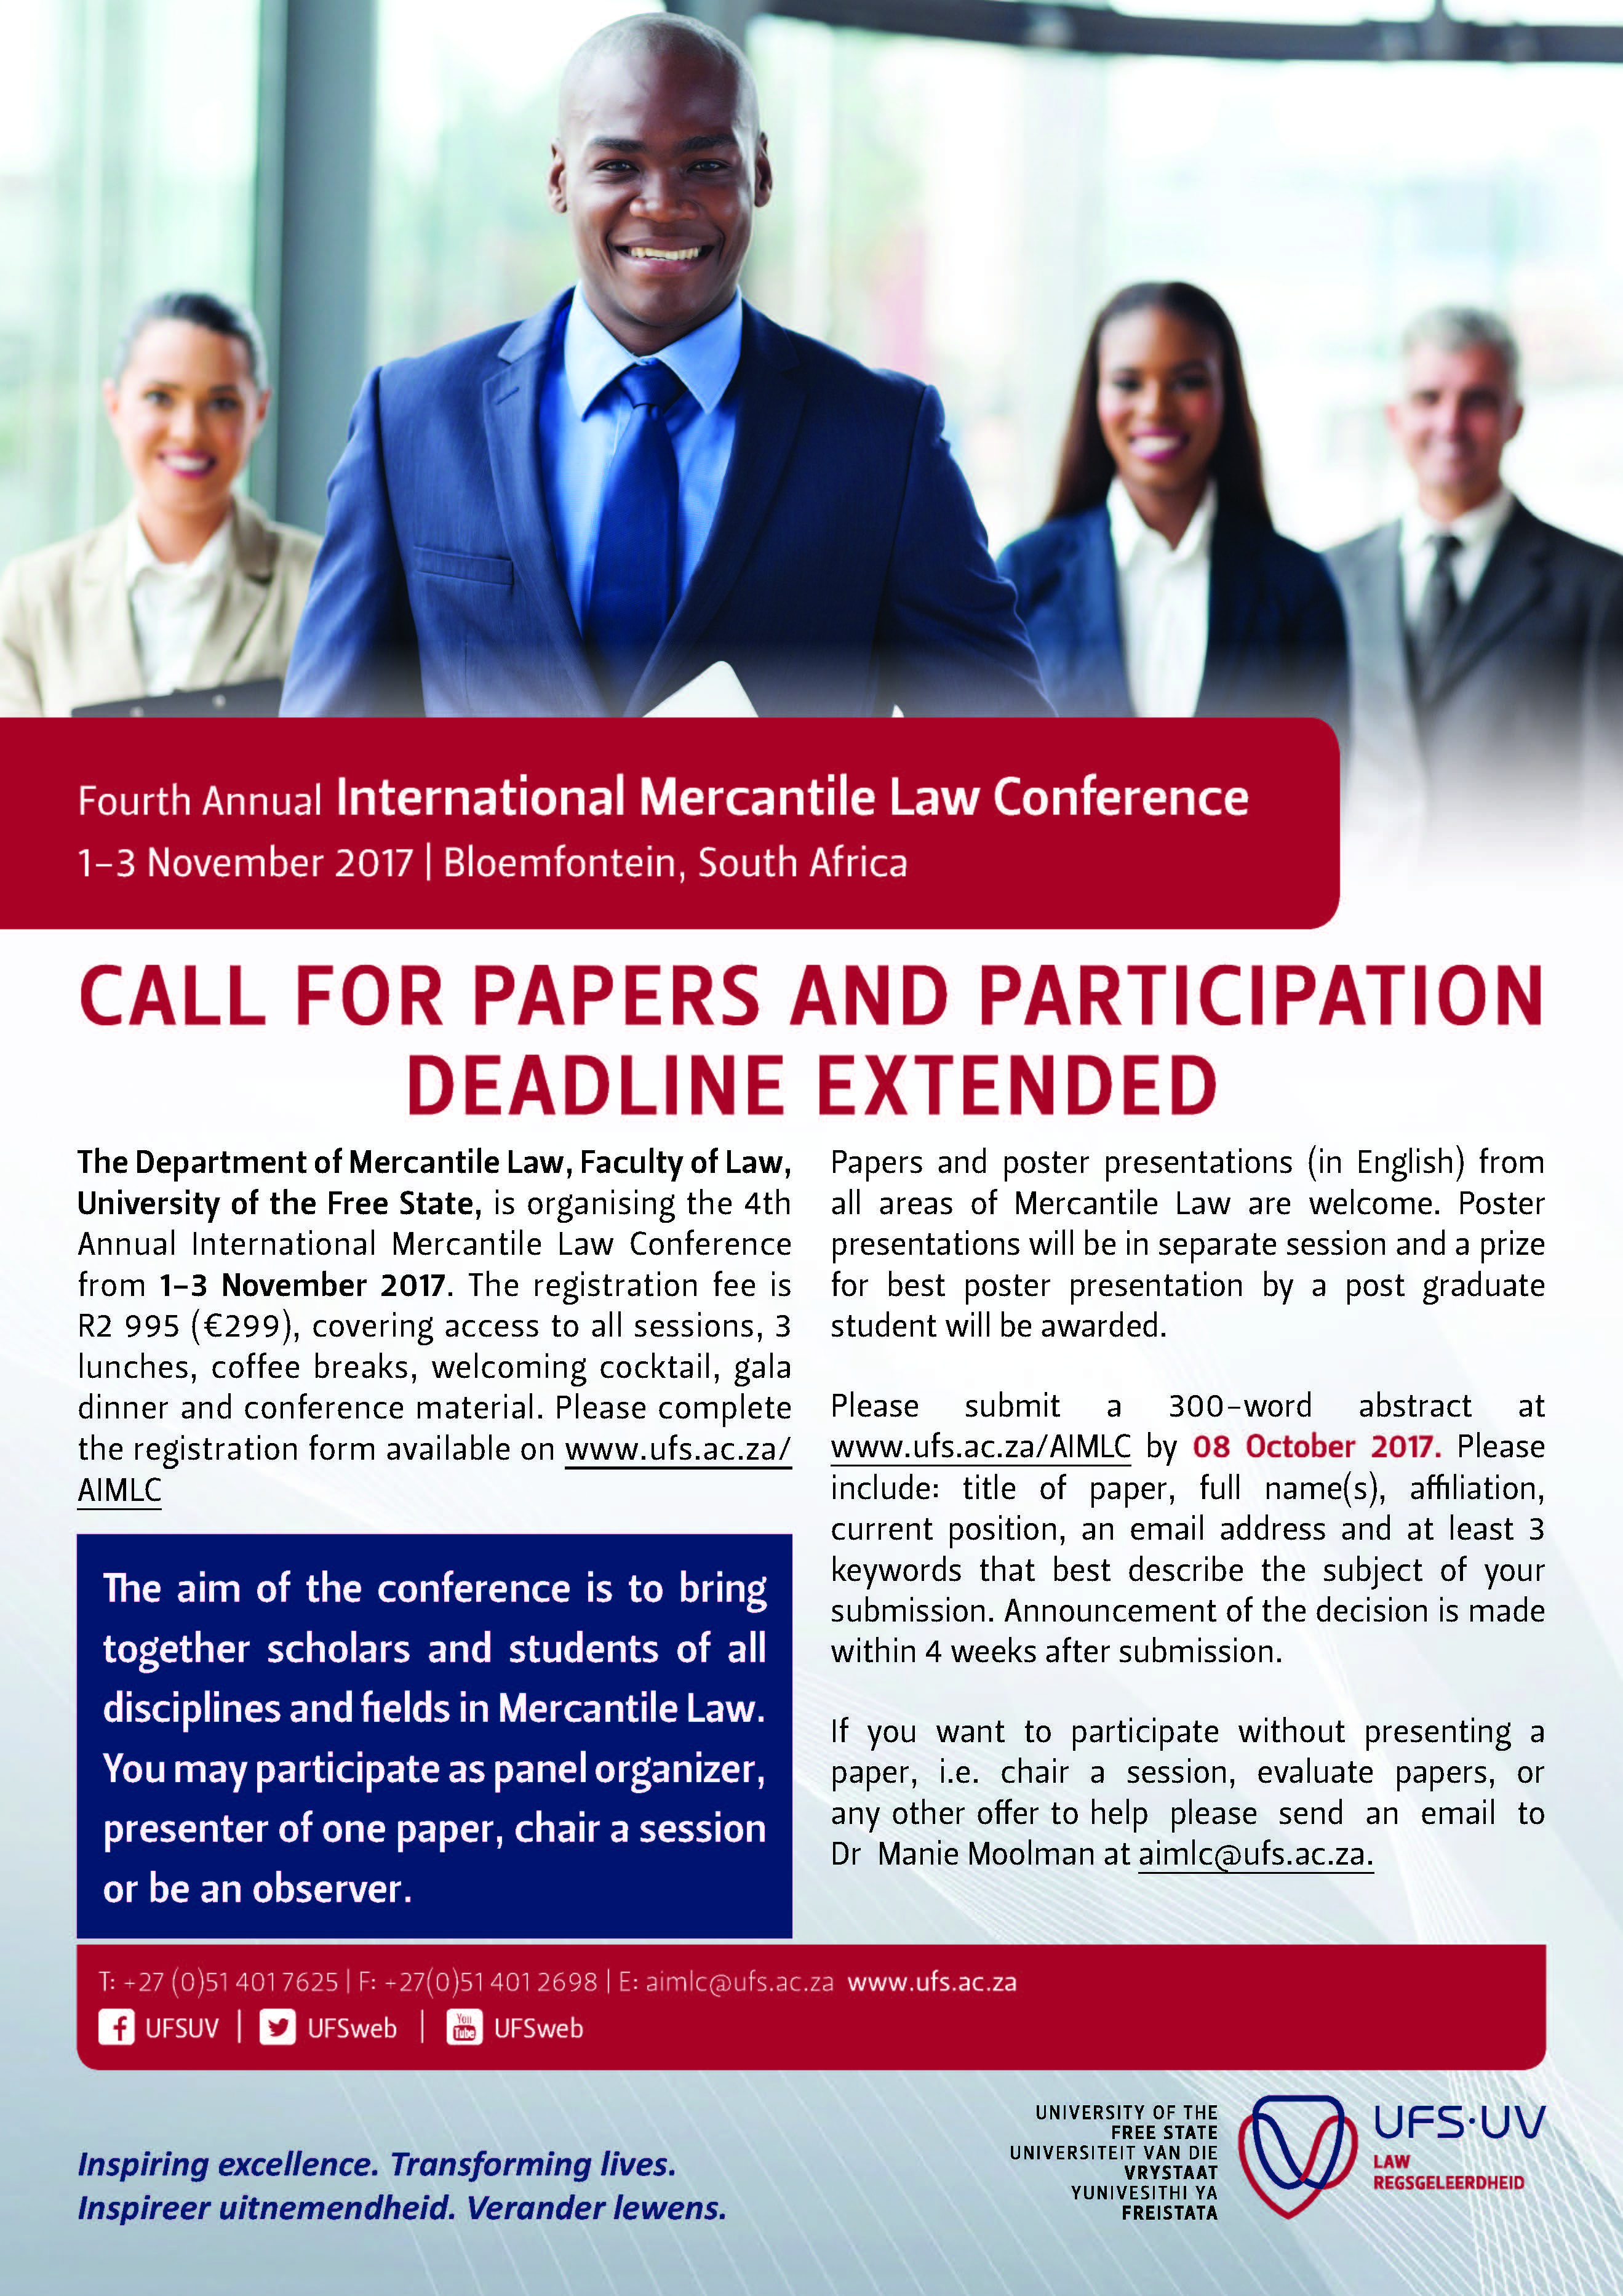 Call for papers deadline extended